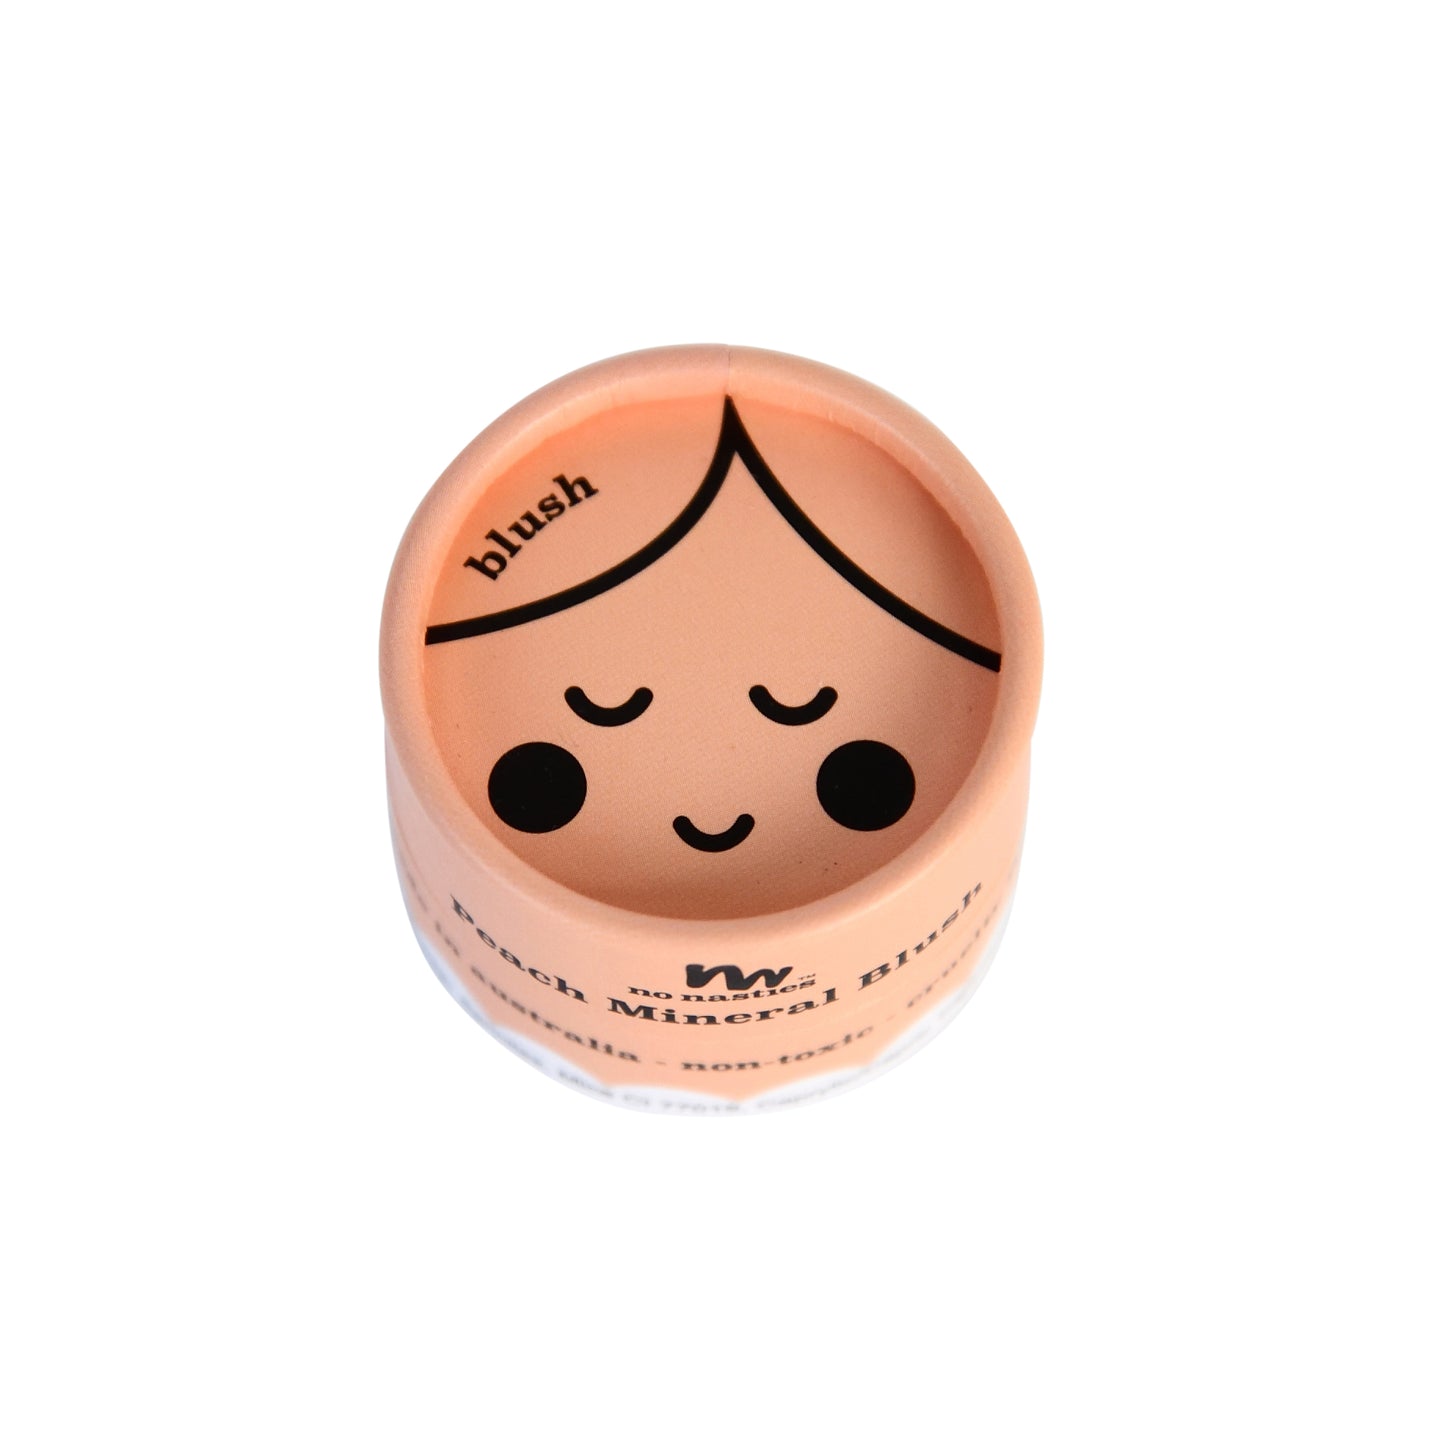 Kids Natural Make Up - Pressed Eco Blush - Shimmery Peach